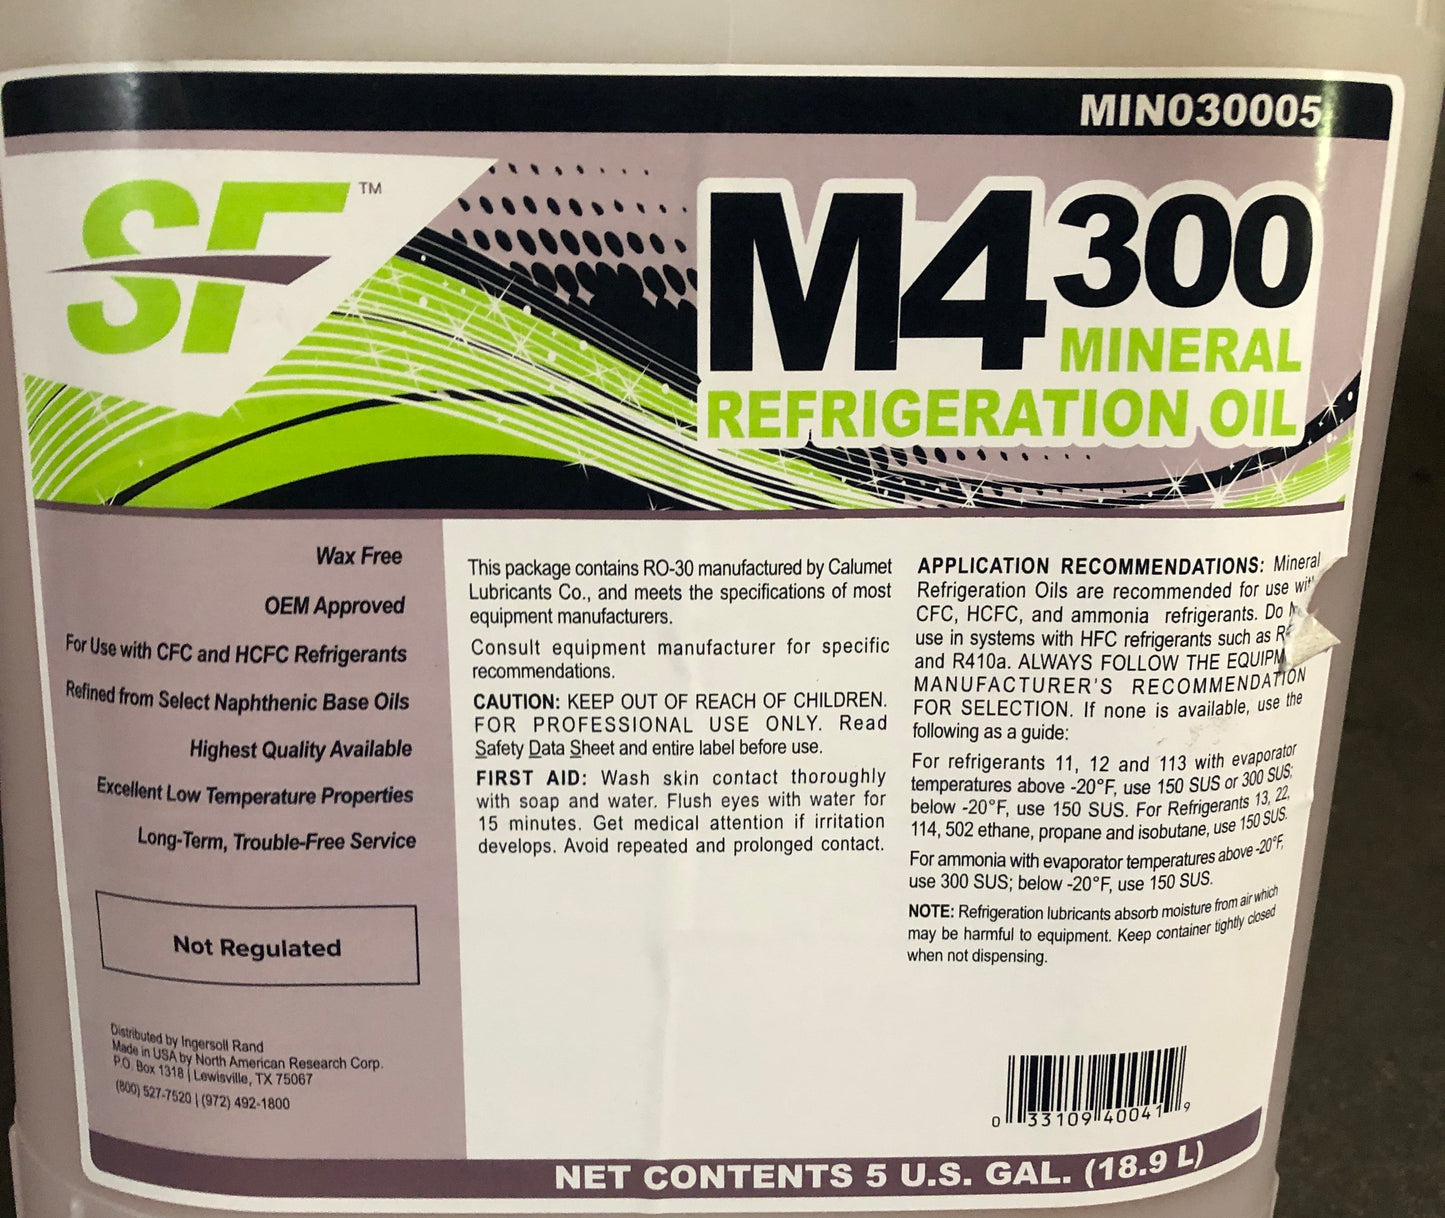 5 GALLON "M4300" MINERAL REFRIGERATION OIL FOR USE WITH CFC, HCFC, AND AMMONIA REFRIGERANTS